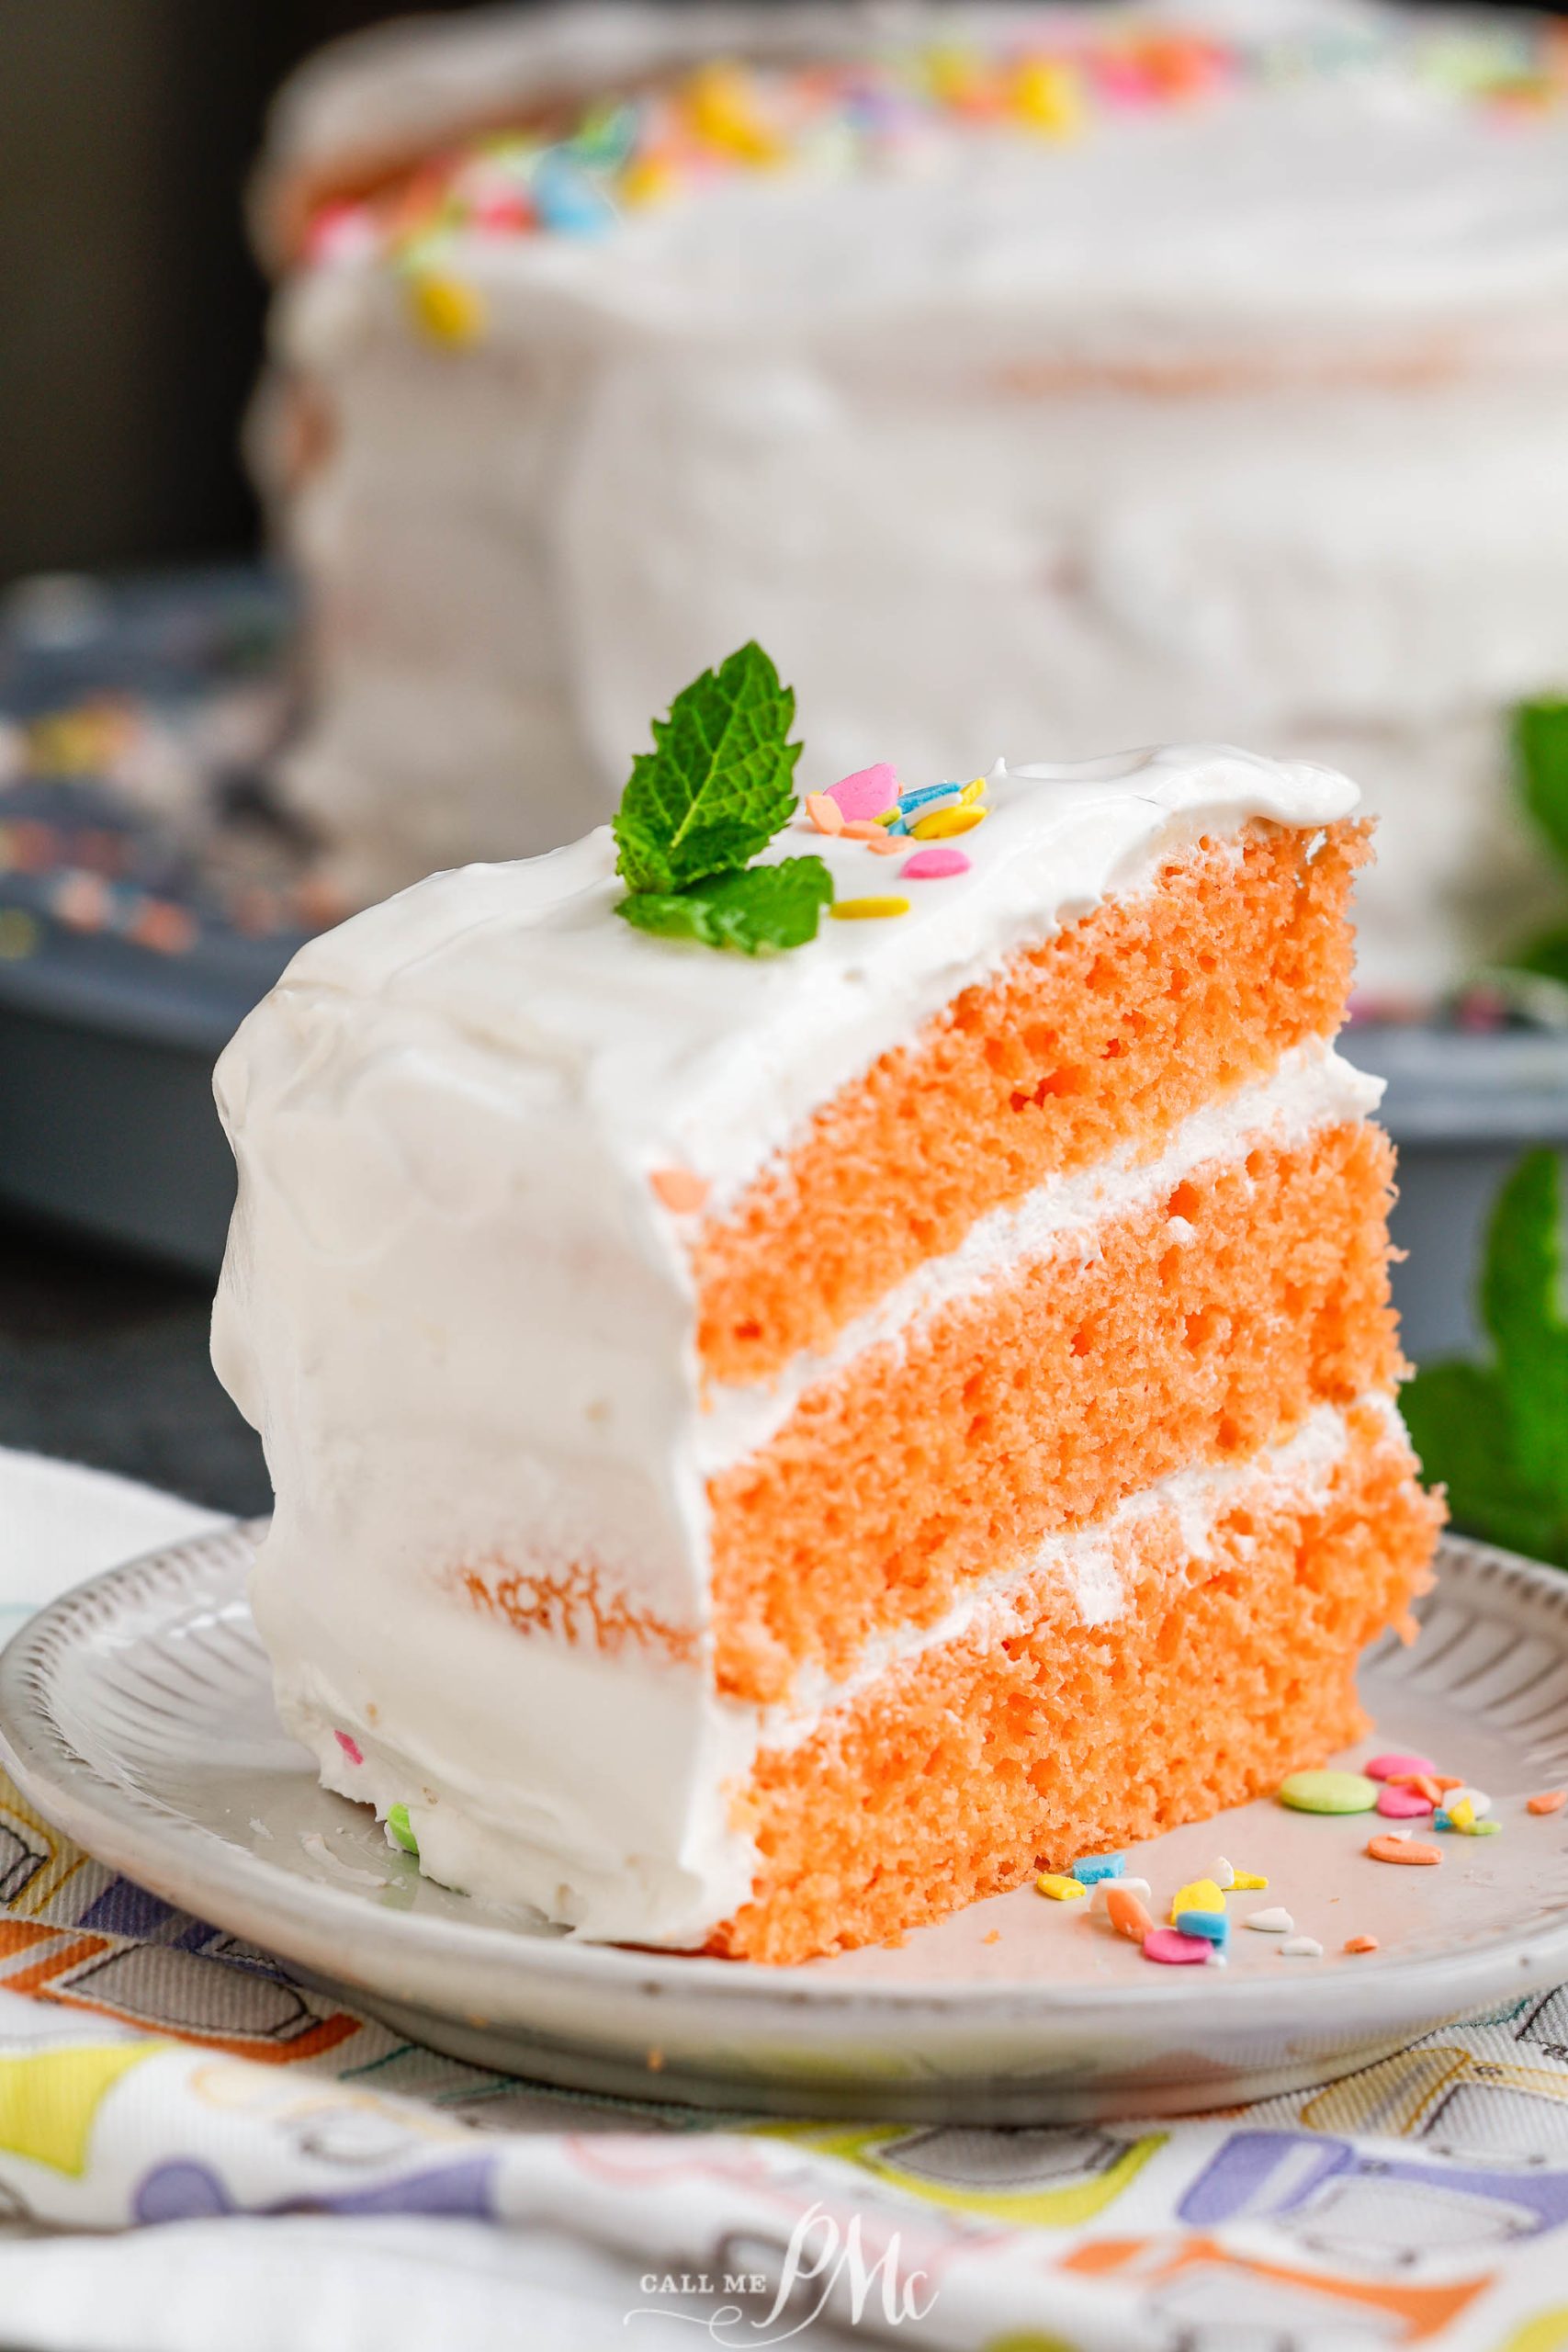 A slice of orange frosted cake on a plate.